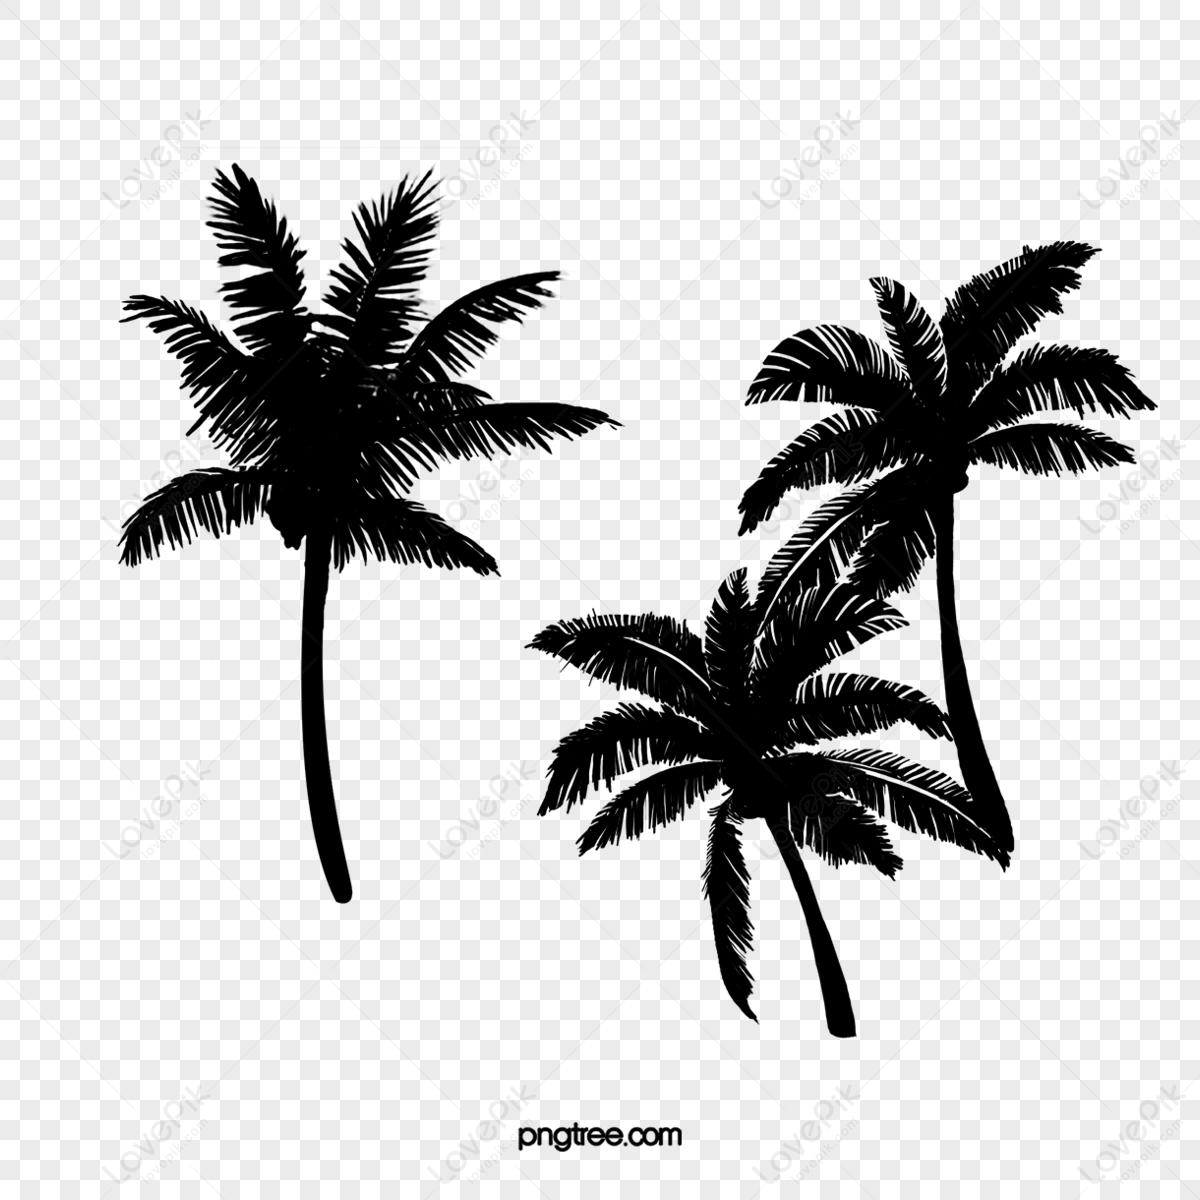 coconut palm tree silhouette vector,coconut leaves,attalea speciosa,palm leaves png image free download